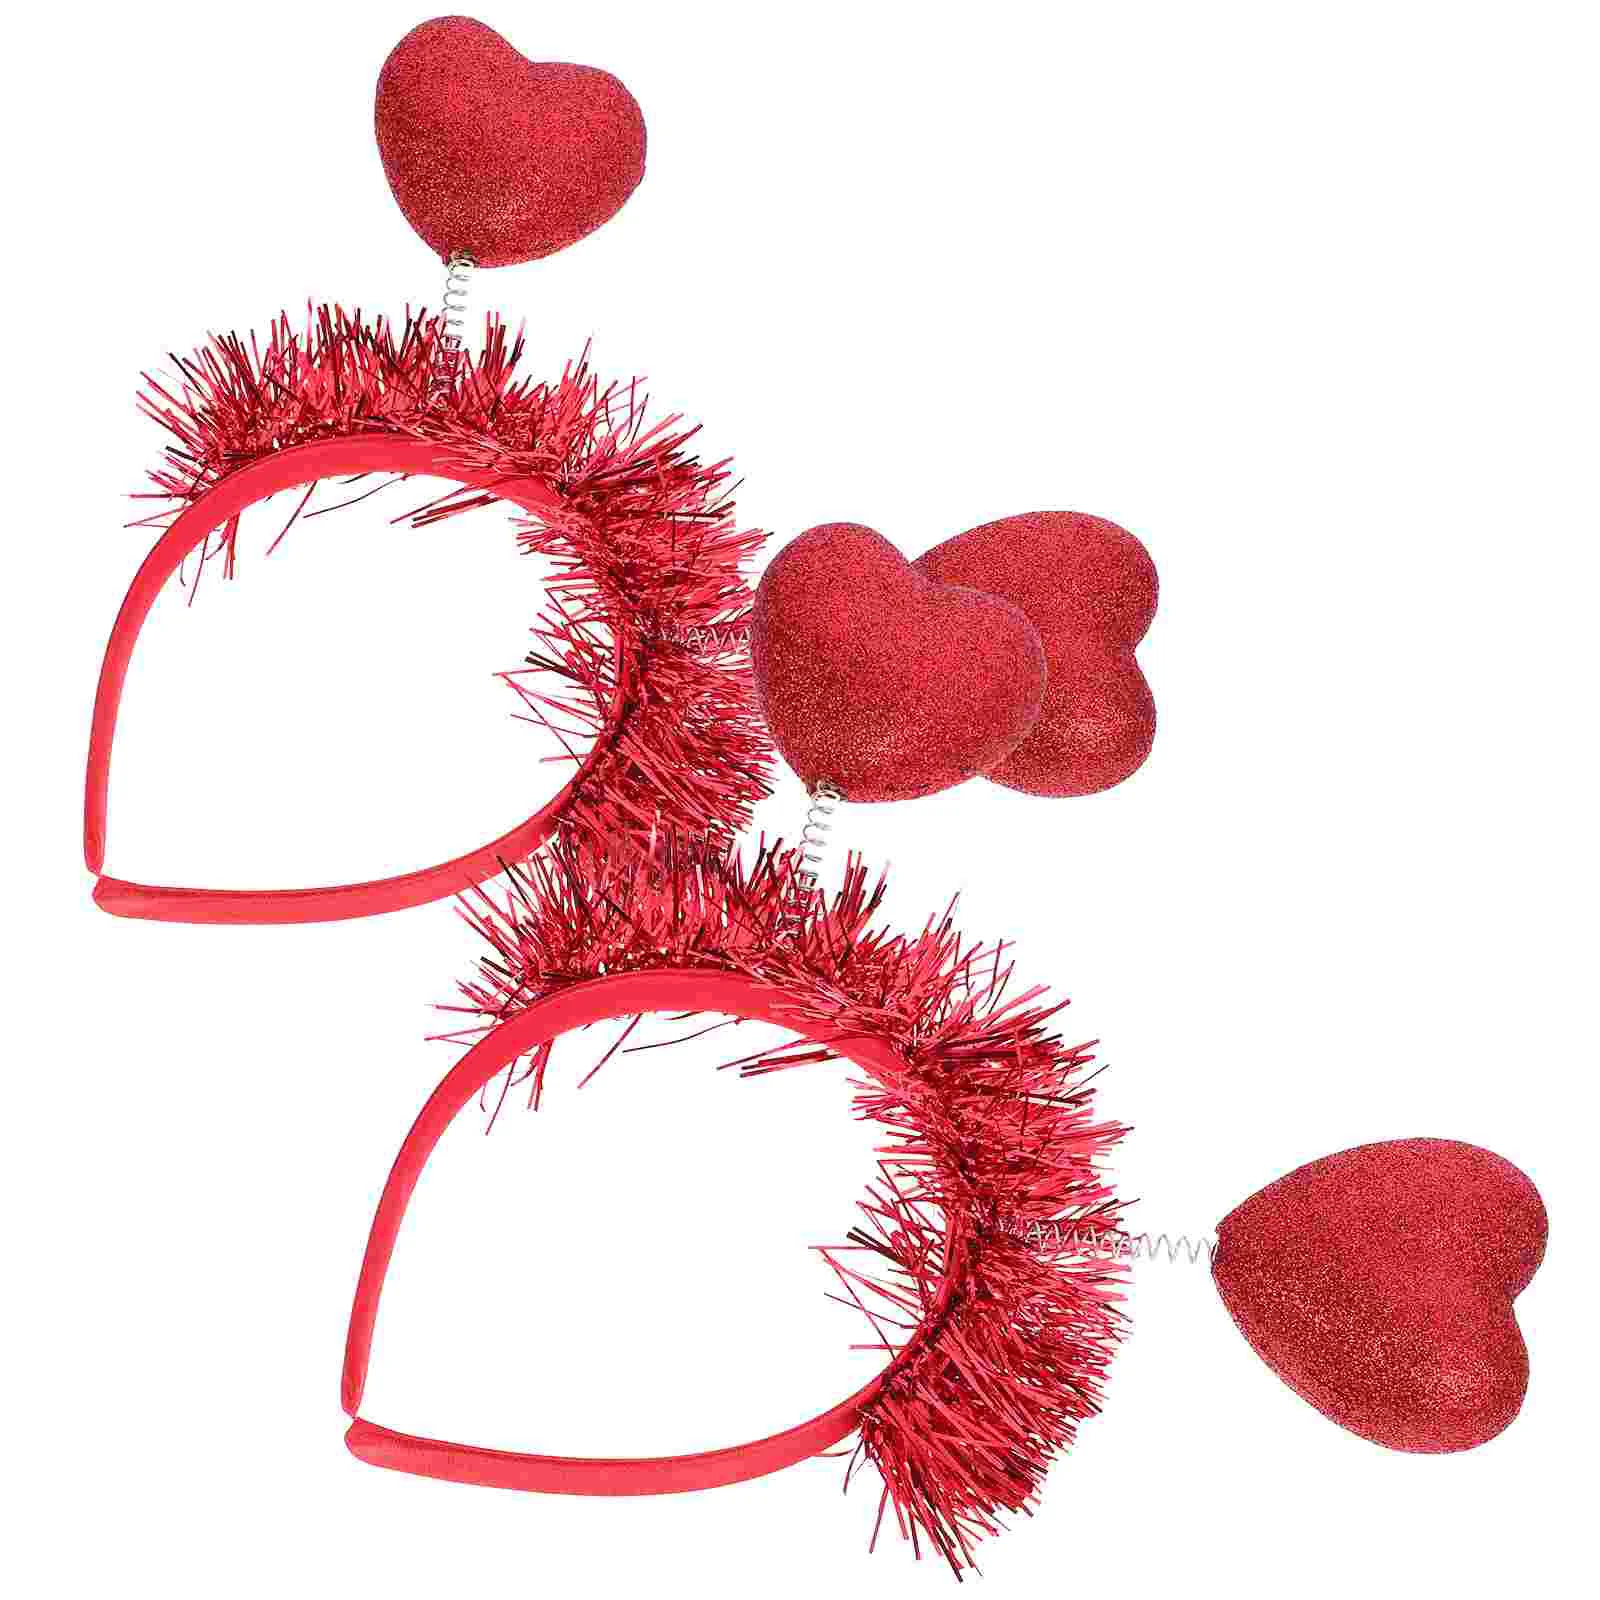 2 Pcs Love Headband Props Valentines Day Party Hairband Wedding Decorations Photography Headpiece Heart-shaped 65 3ft aisle runner mirror rug double sided carpet wedding silver decorations us